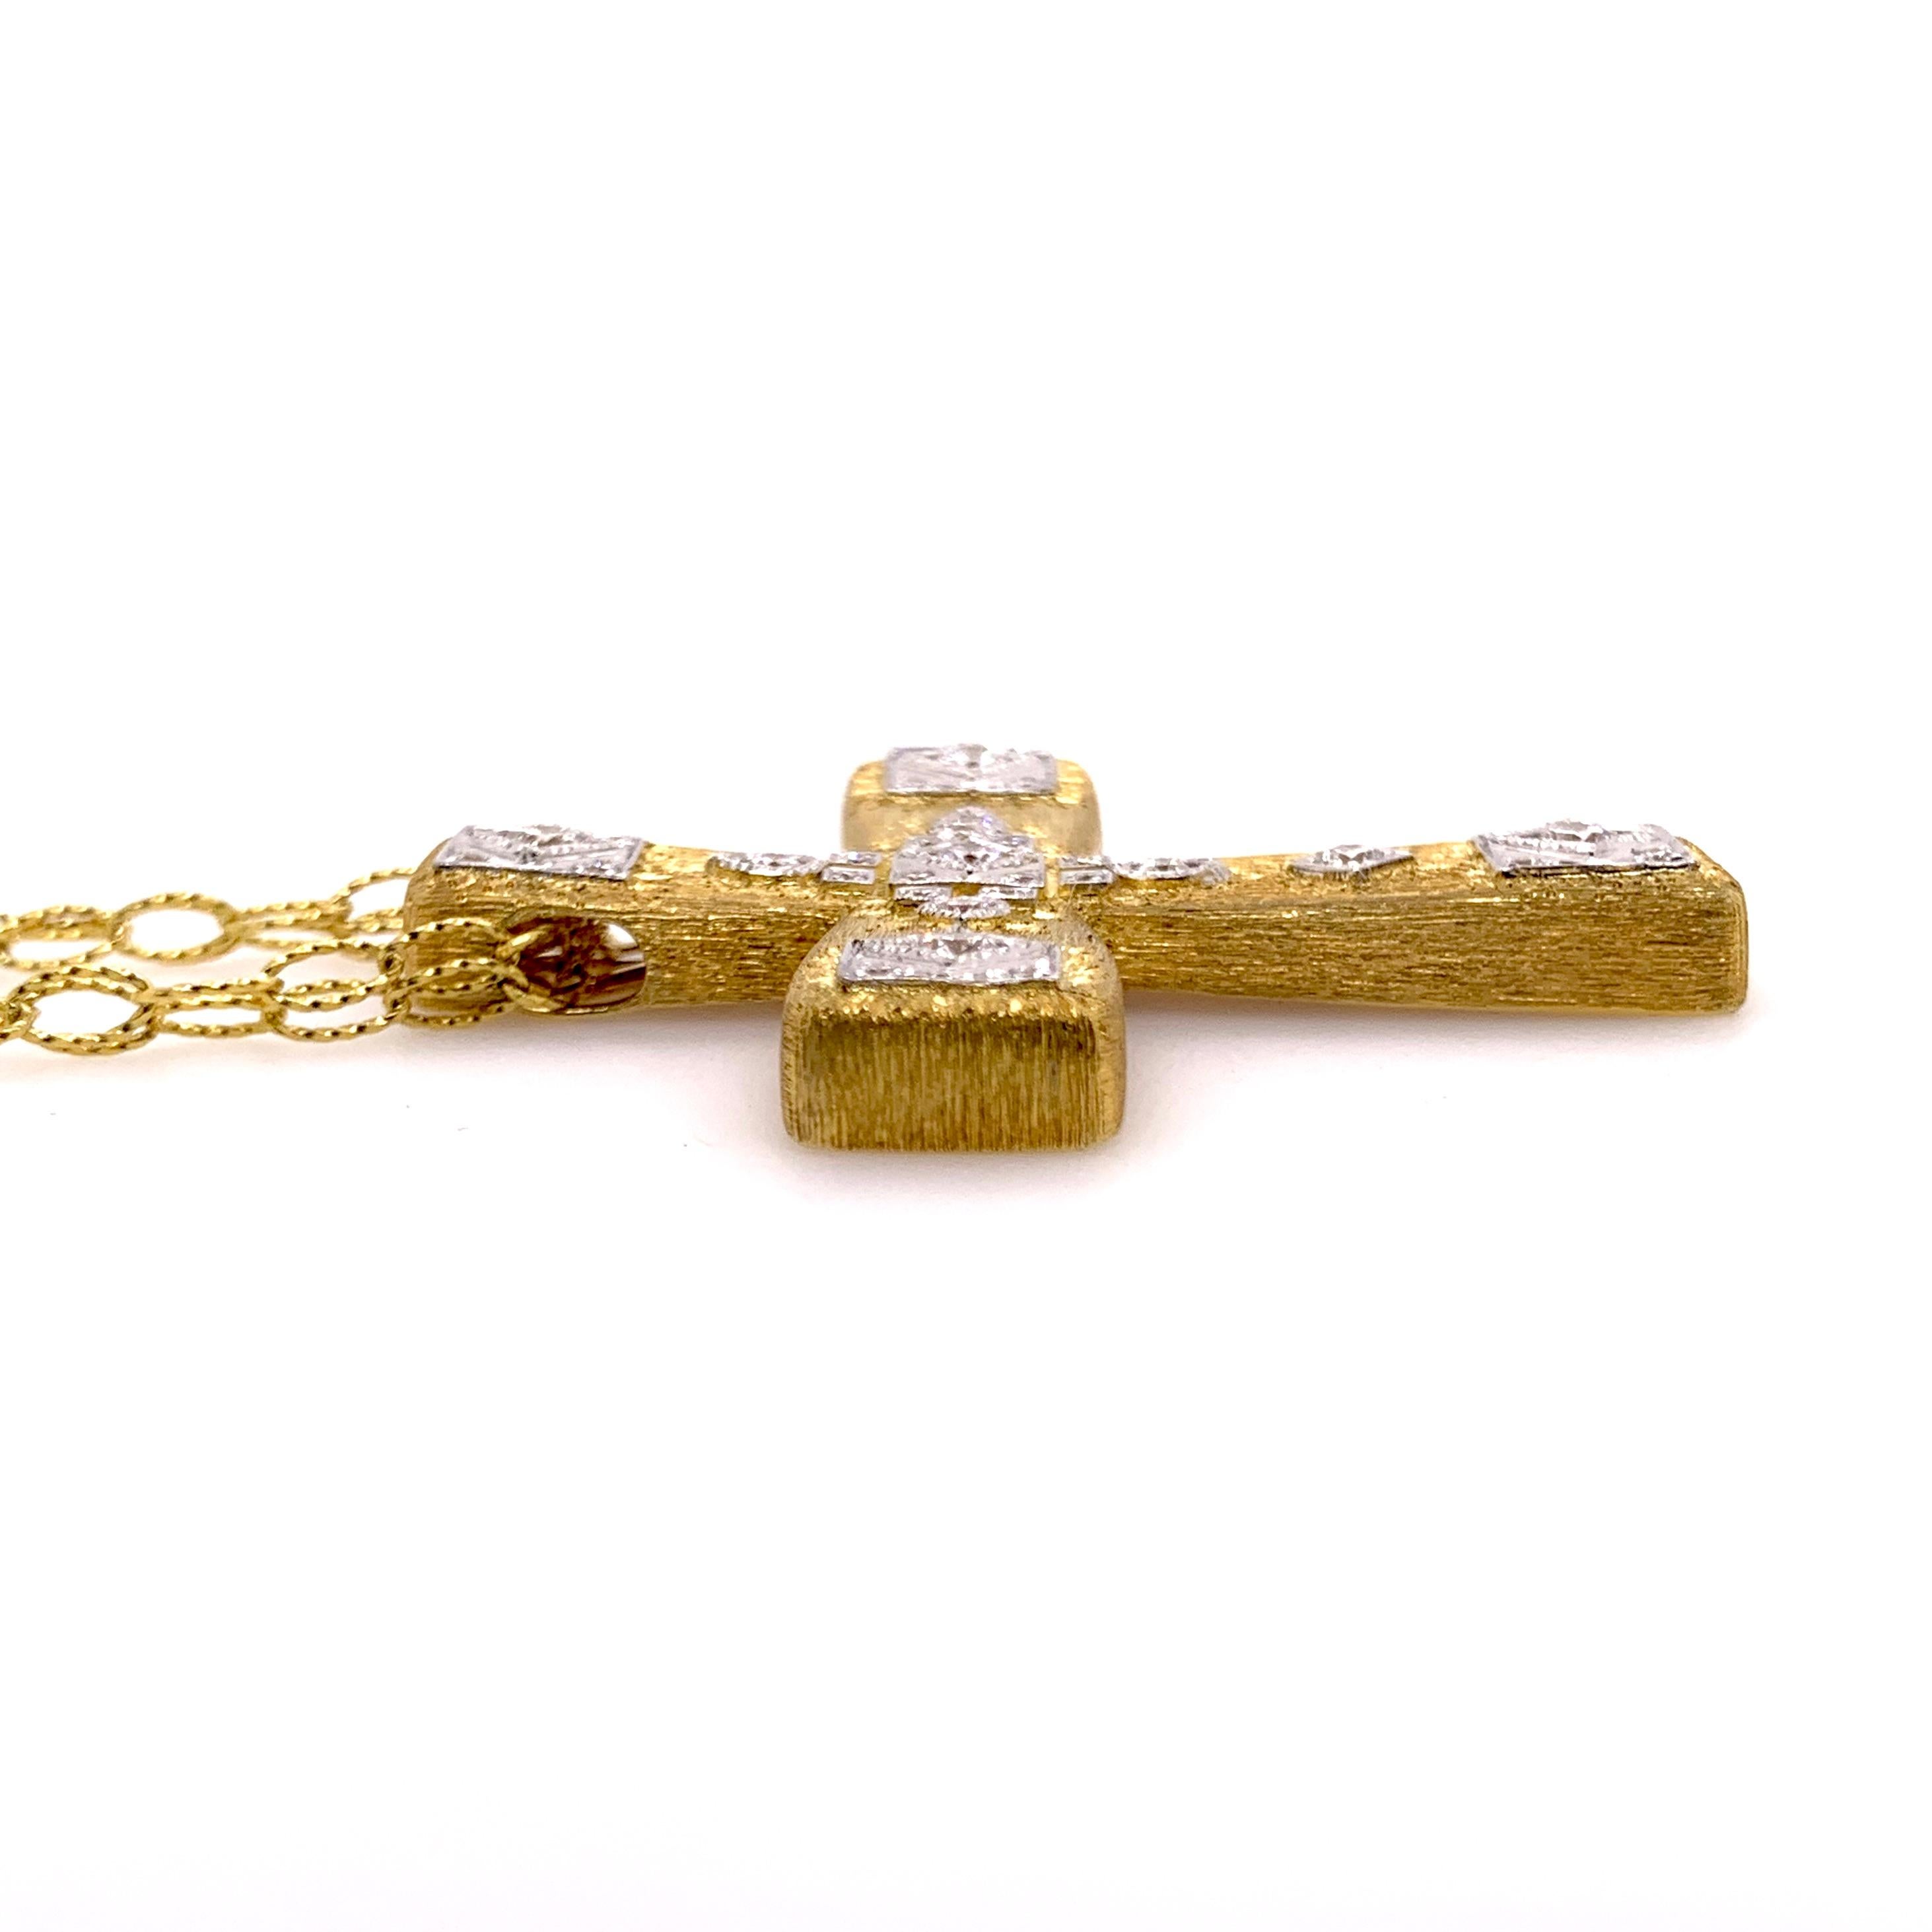 This immaculate handmade diamond cross is absolutely stunning.  The fine details on the gold truly exempts the immense detail and thought process involved in making this heirloom quality piece.  The high shine finish on the backside shows the